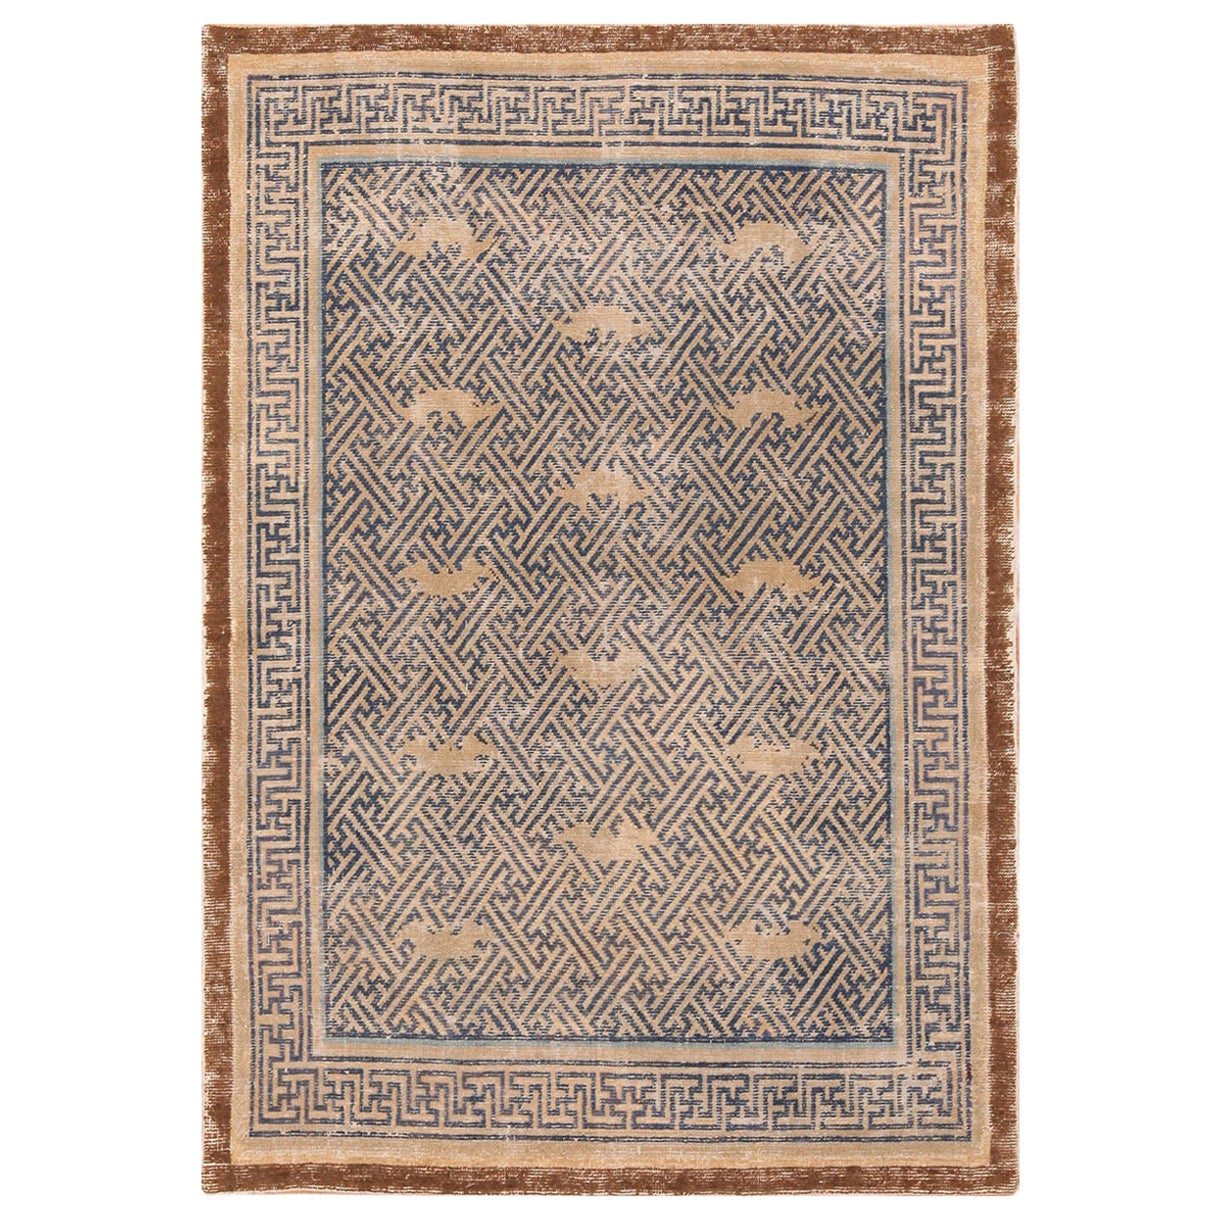 17th Century Chinese and East Asian Rugs